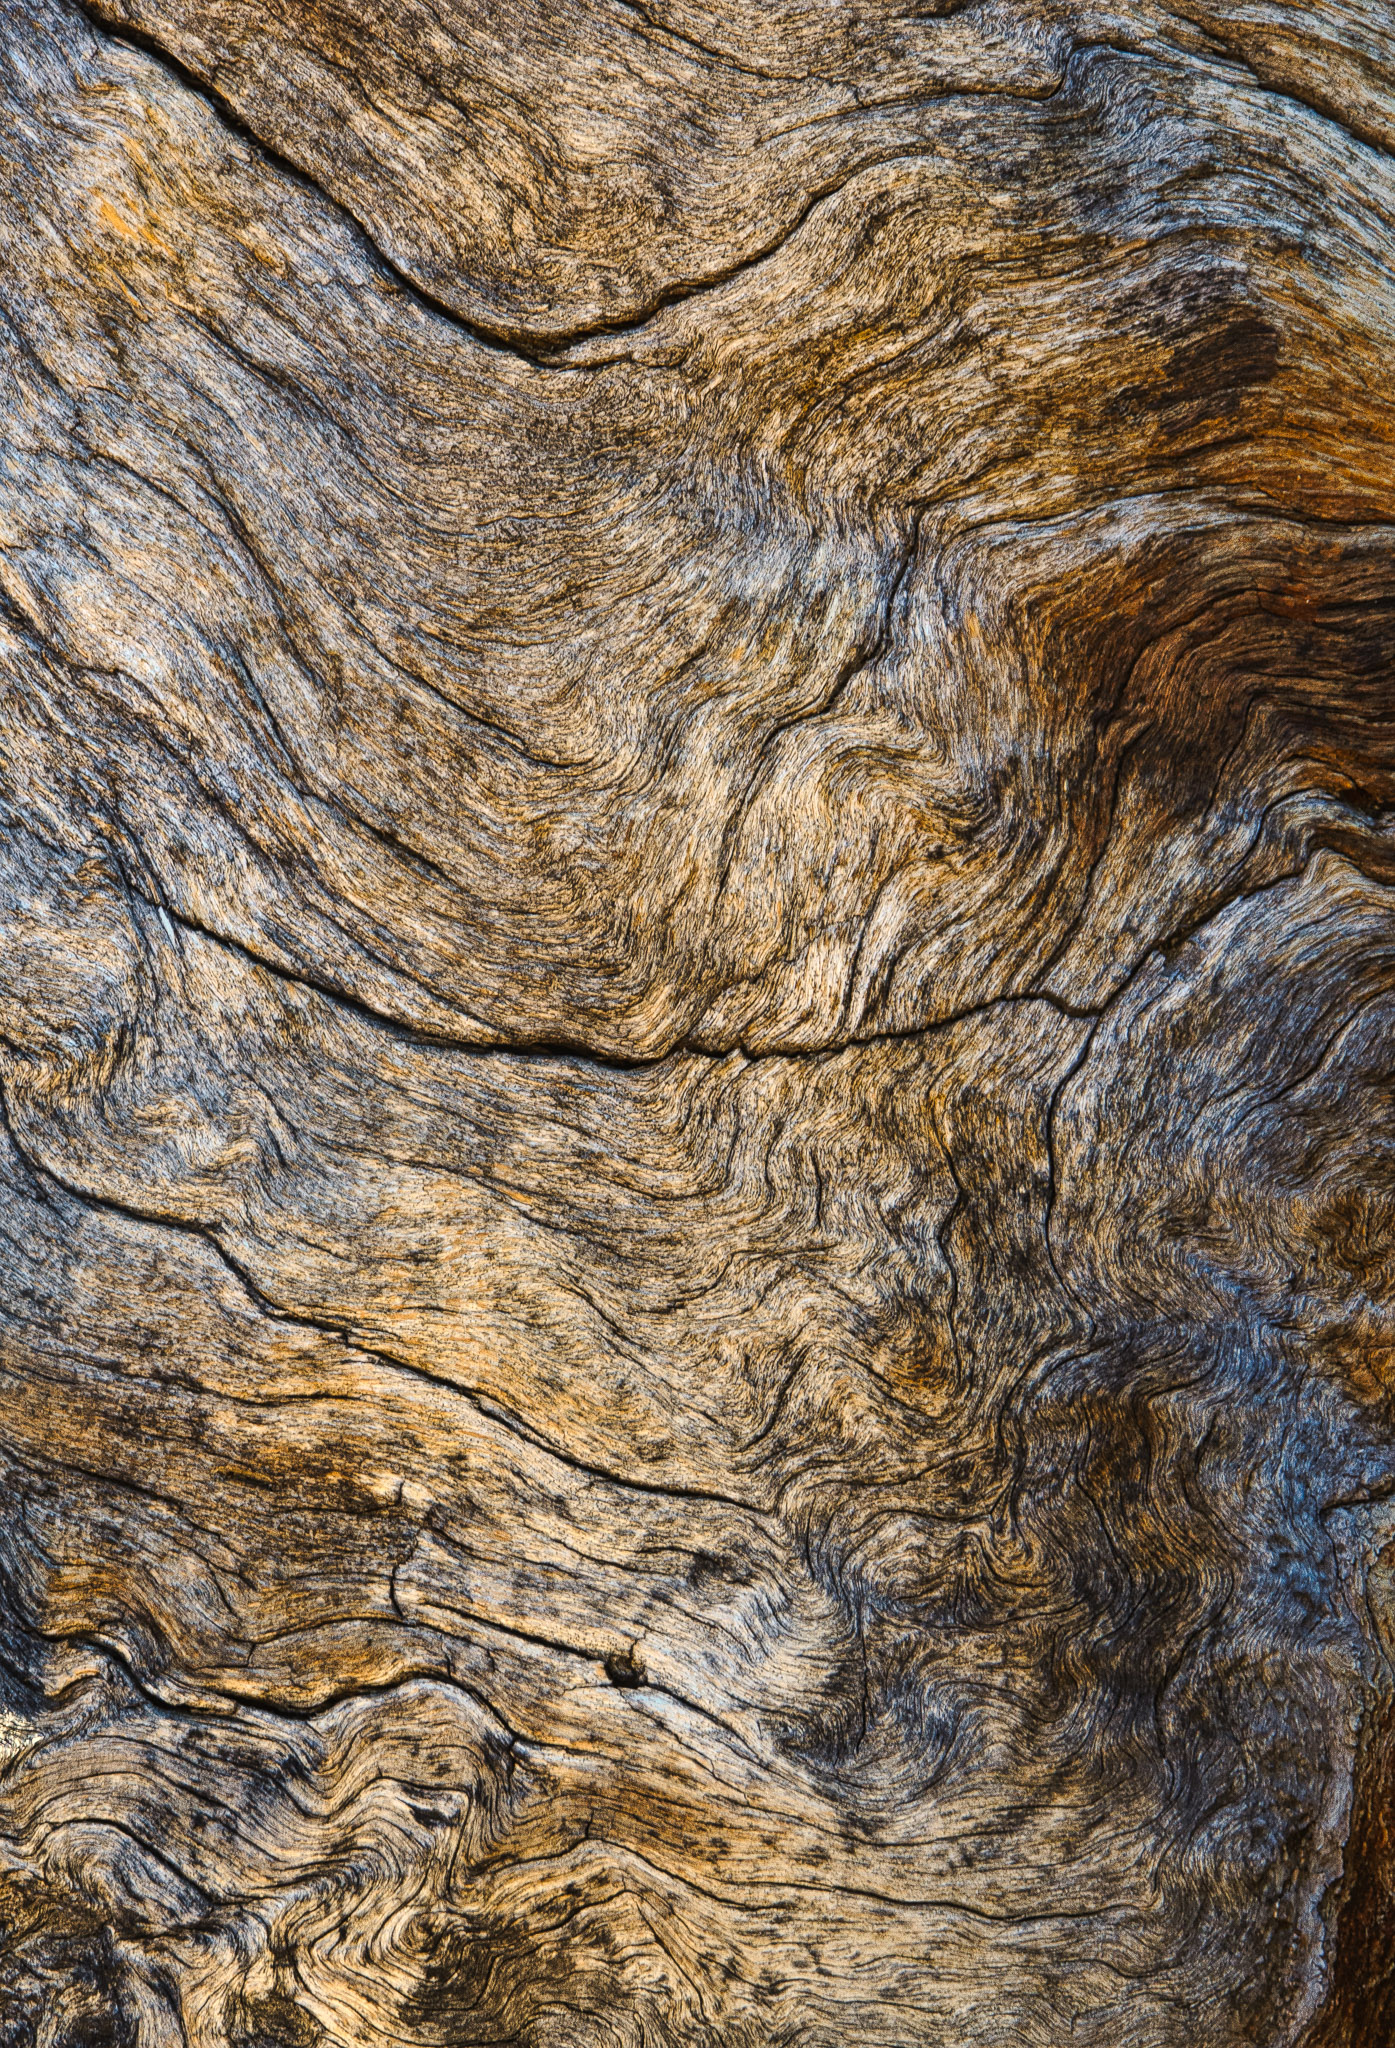 Texture of bark on tree along Harpers Corner Trail in Dinosaur National Monument.